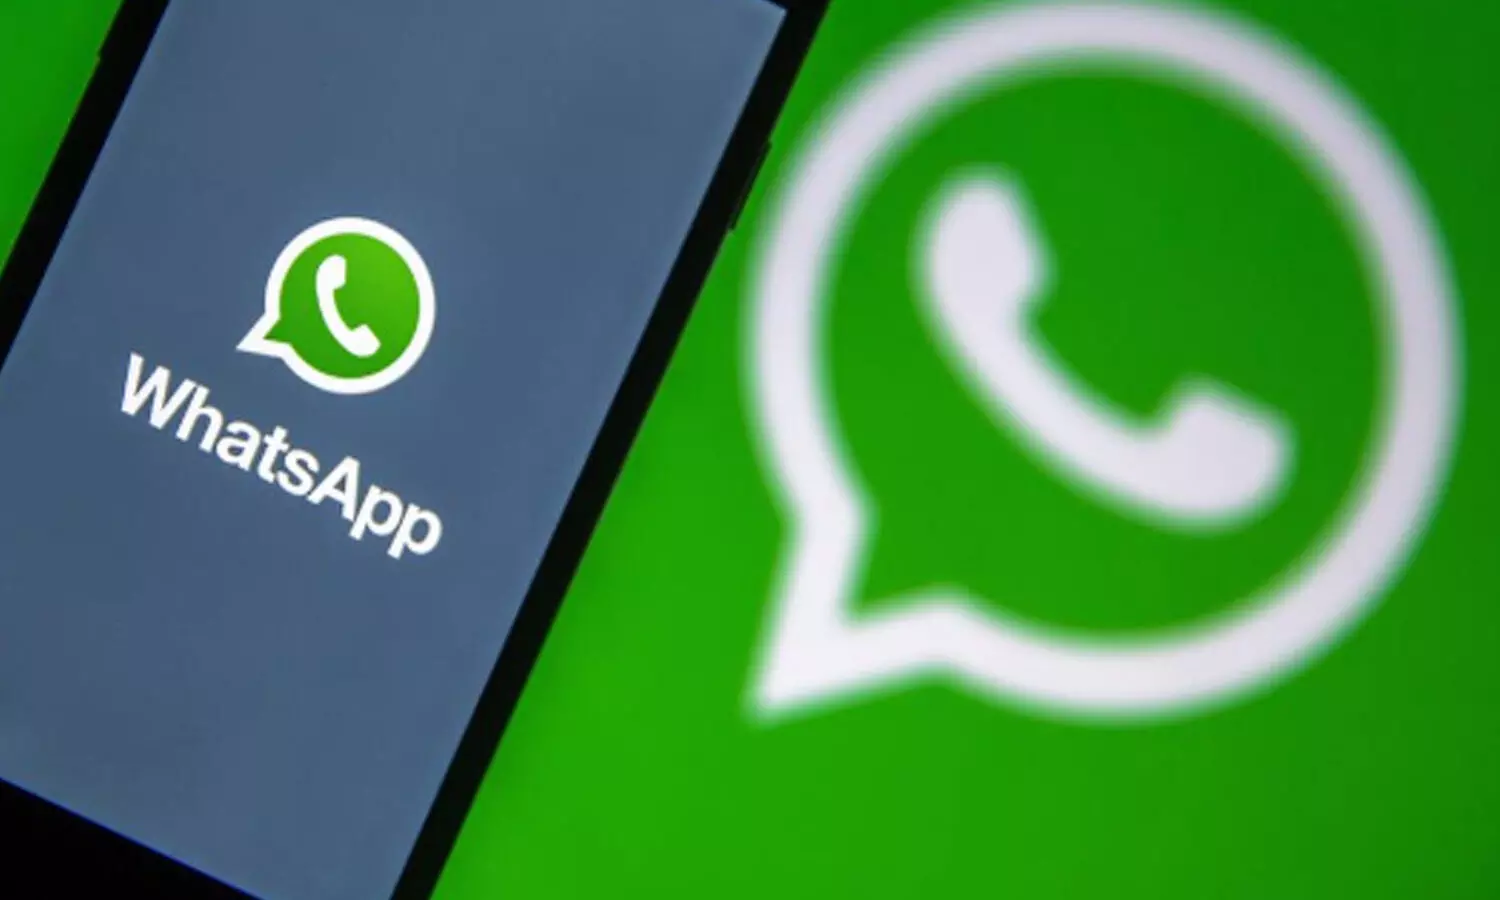 WhatsApp Privacy: Delhi HC decision may come before new policy comes into force